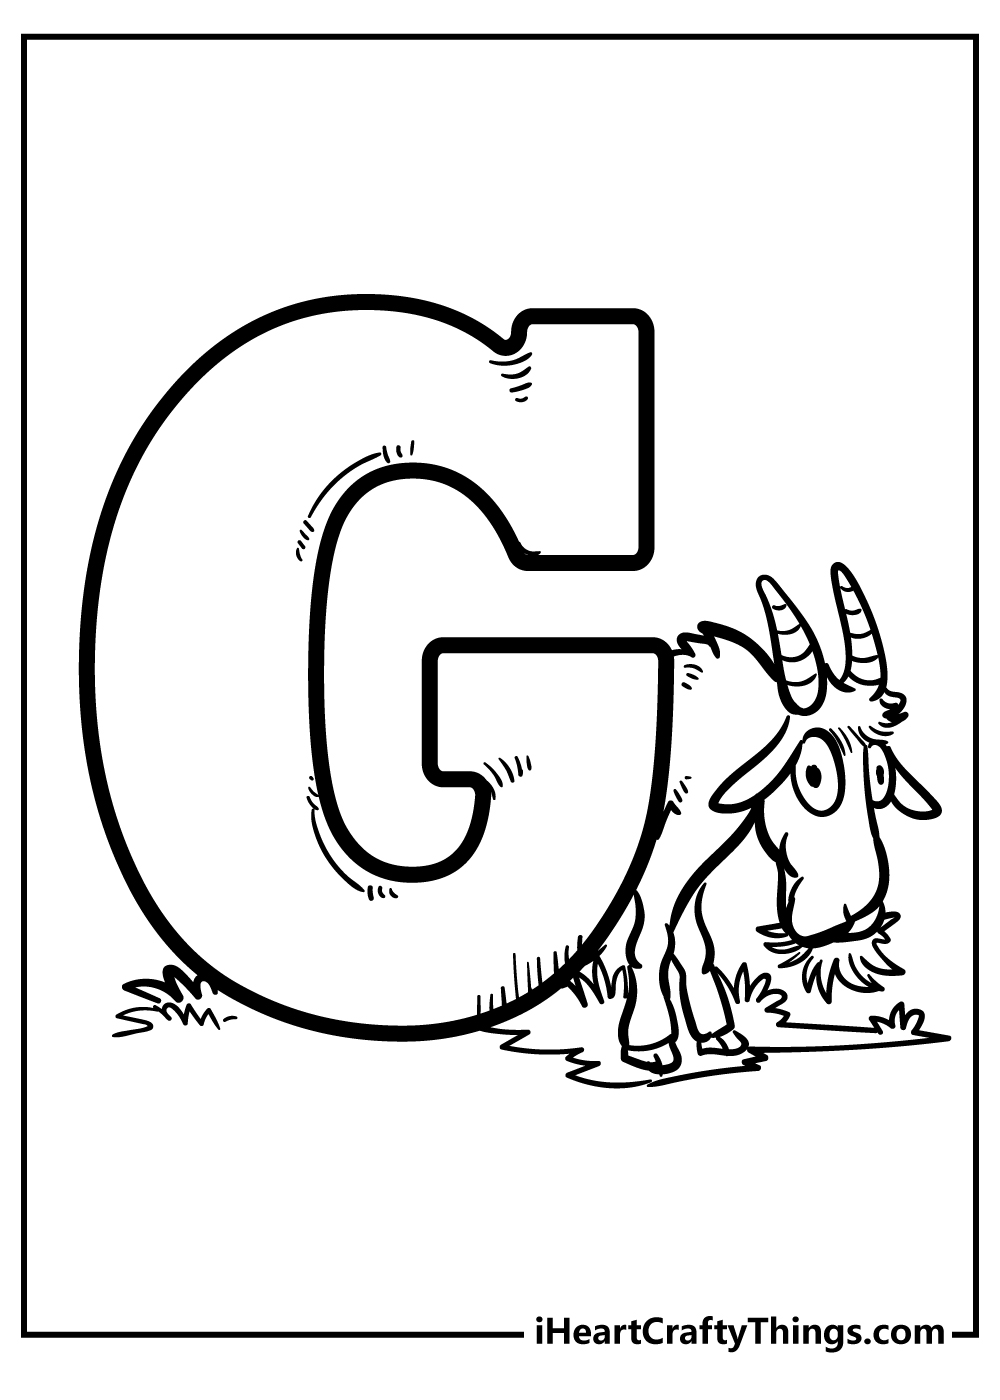 Letter G Coloring Pages for preschoolers free printable